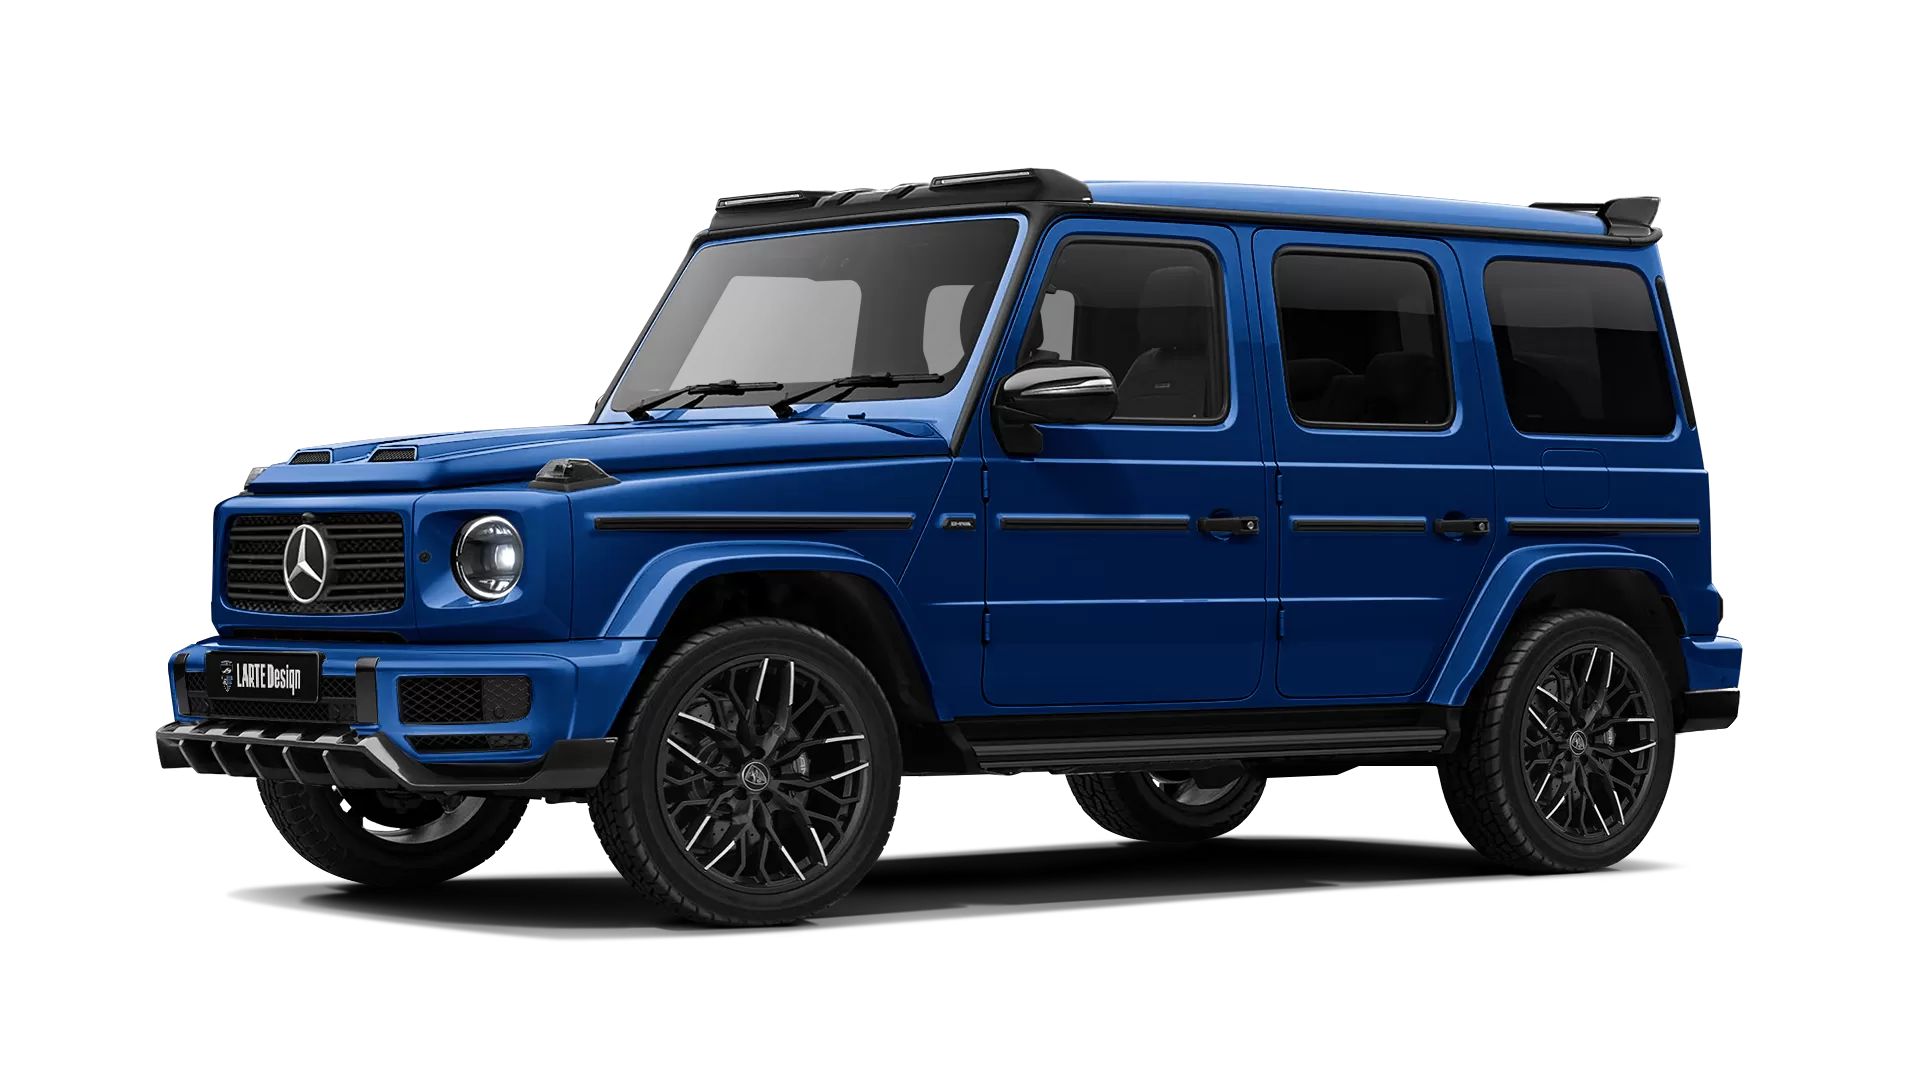 Mercedes G class W463 with painted body kit: front view shown in Brilliant Blue